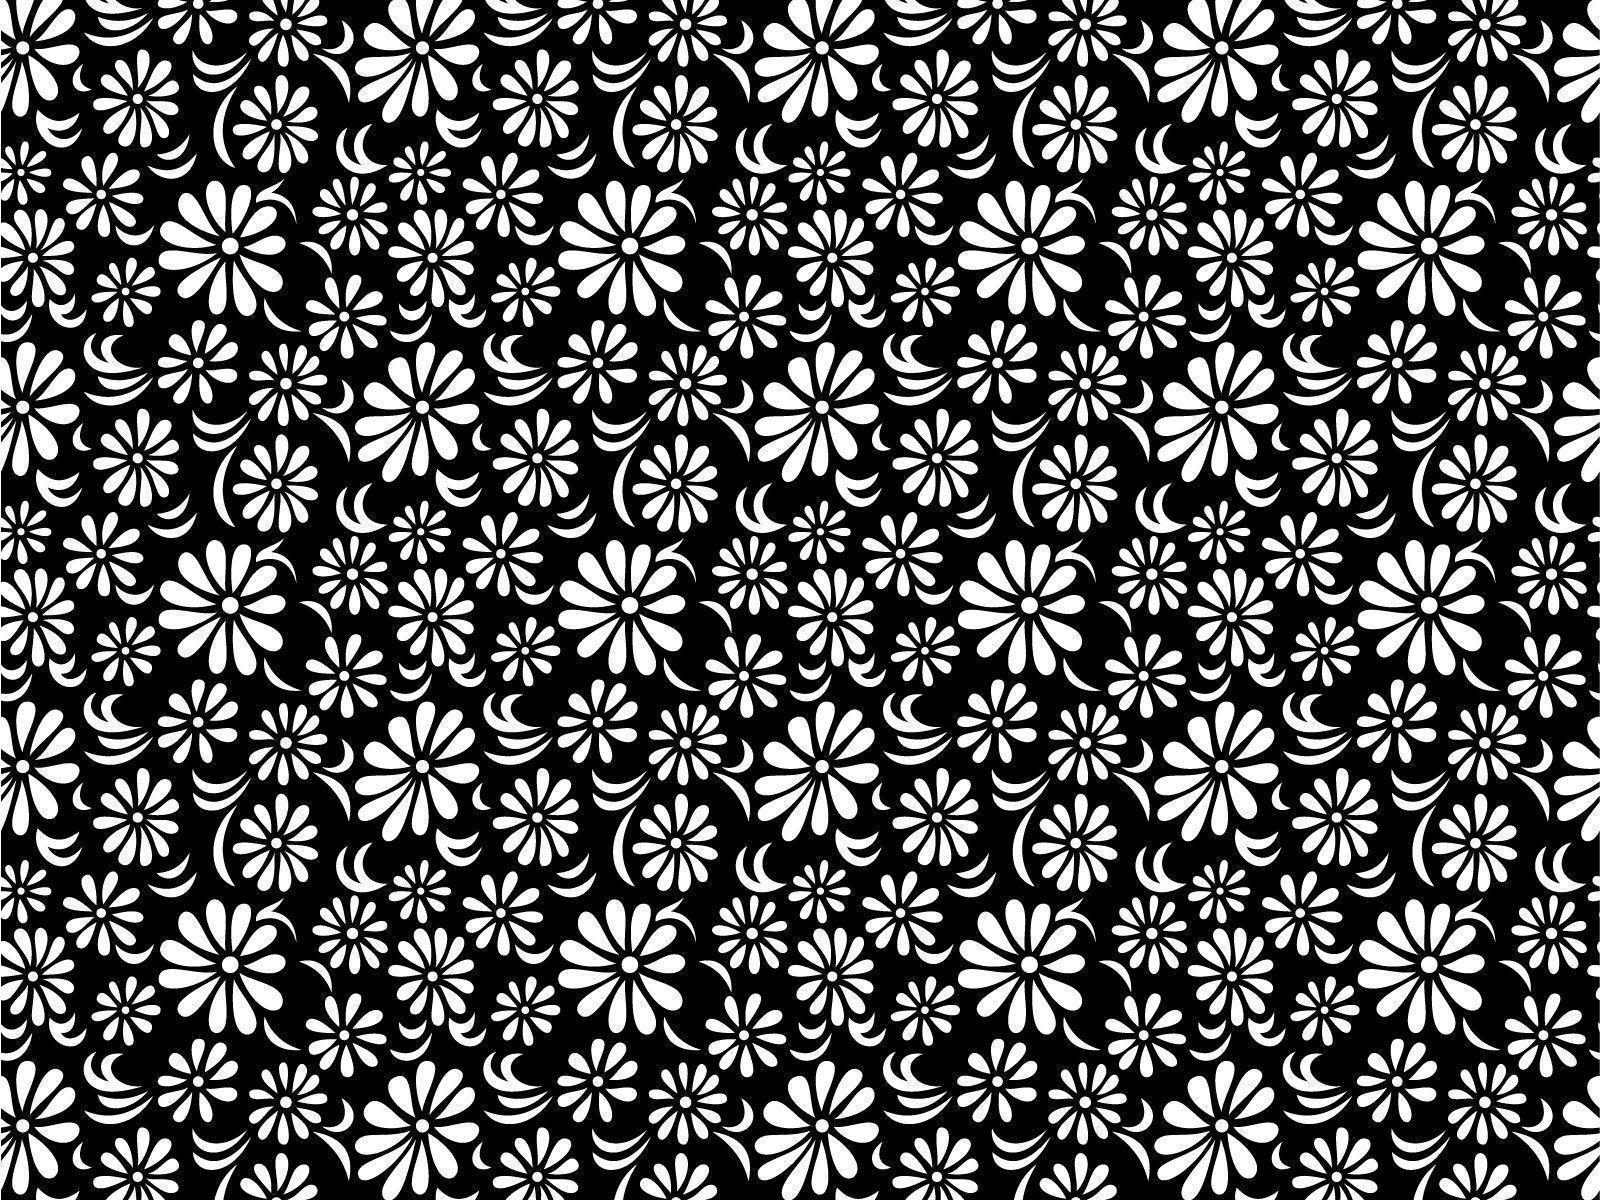 Download Black and White Floral 5176 1600x1200 px High Resolution